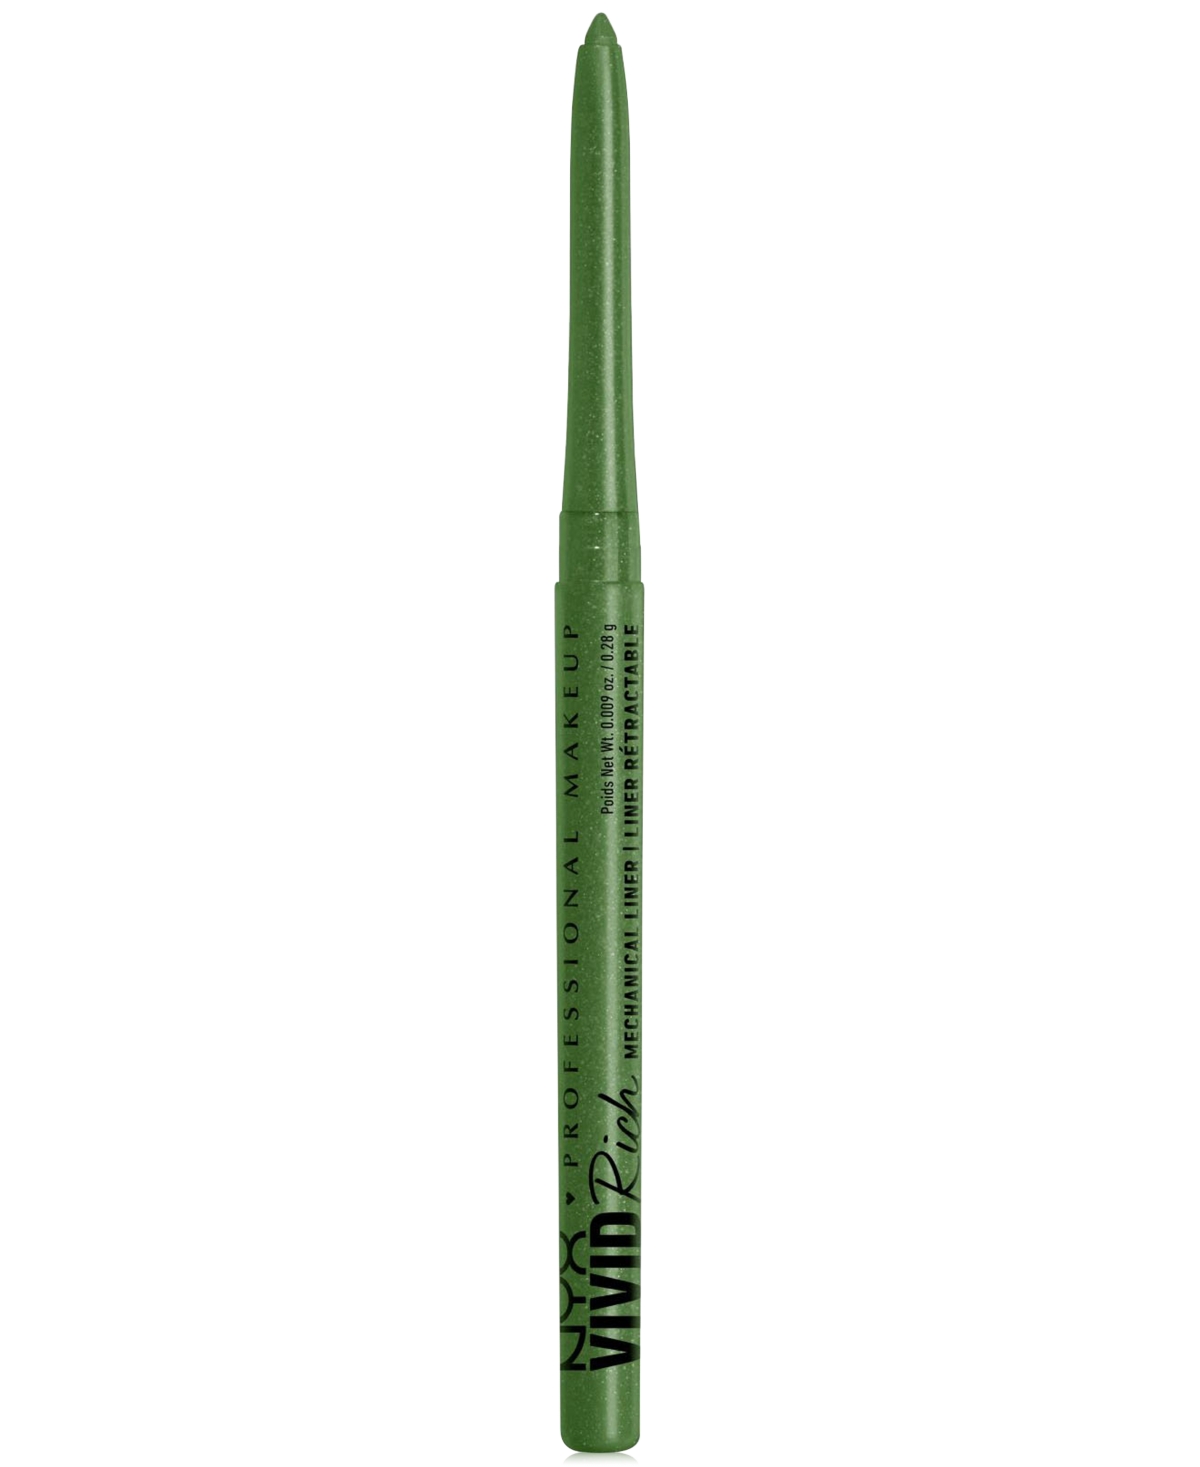 Nyx Professional Makeup Vivid Rich Mechanical Liner Pencil In It's Giving Jade